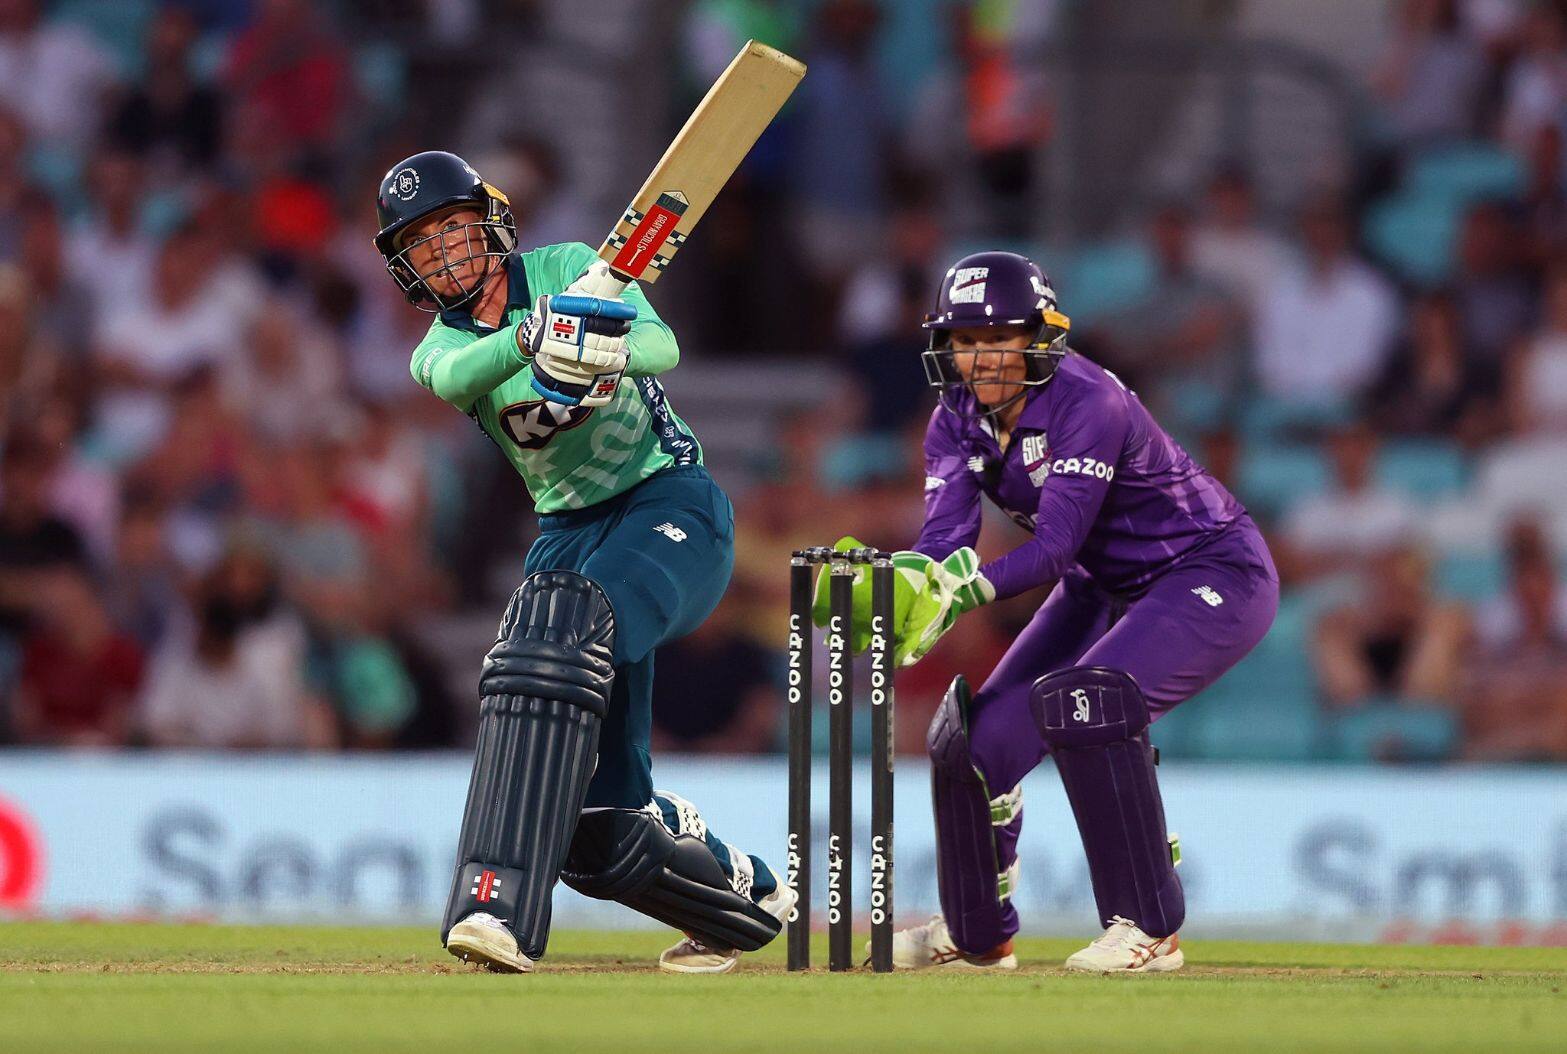 The Women's Hundred 2022: Winfield stars as Oval Invincibles hammer Northern Superchargers by 9 wickets
